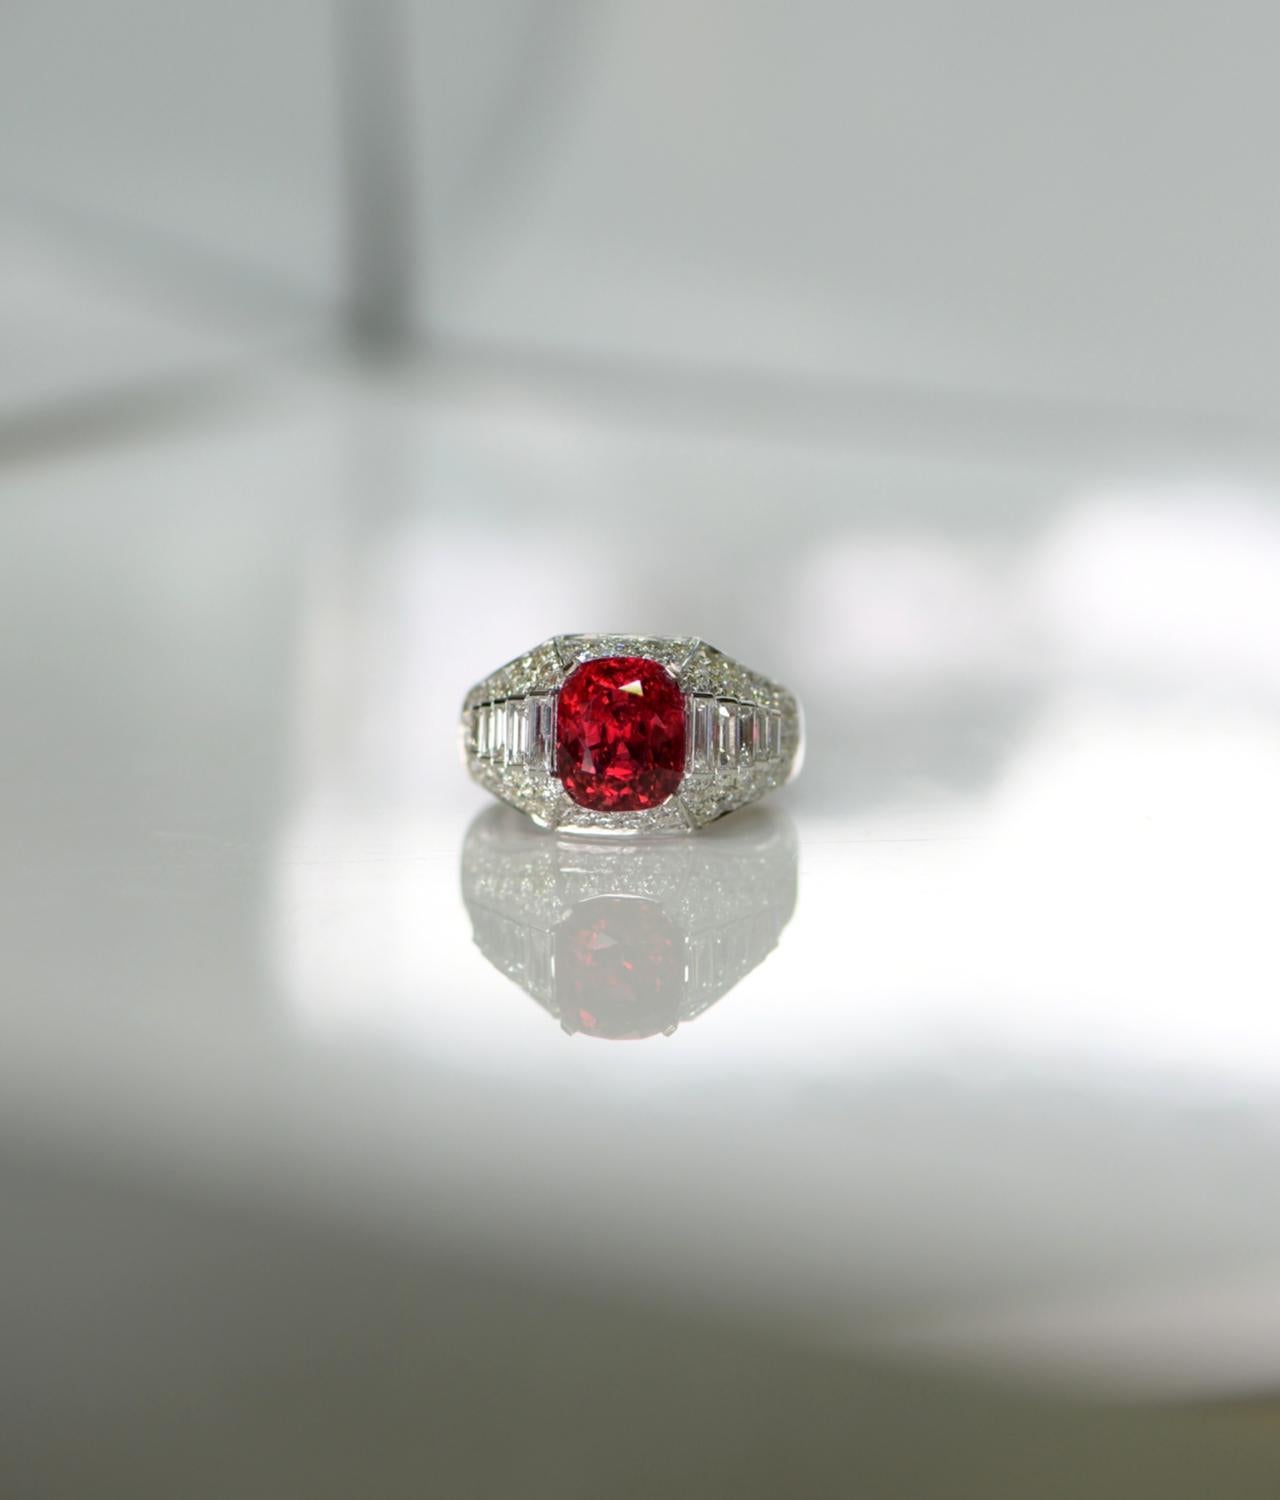 Set with an oval-shaped red spinel weighing over 3.5 carats and accented with baguette and round diamonds, size 6, signed Bulgari.

This spinel has an absolutely gorgeous colour and the cut is excellent. The fire you get from this stone is simply